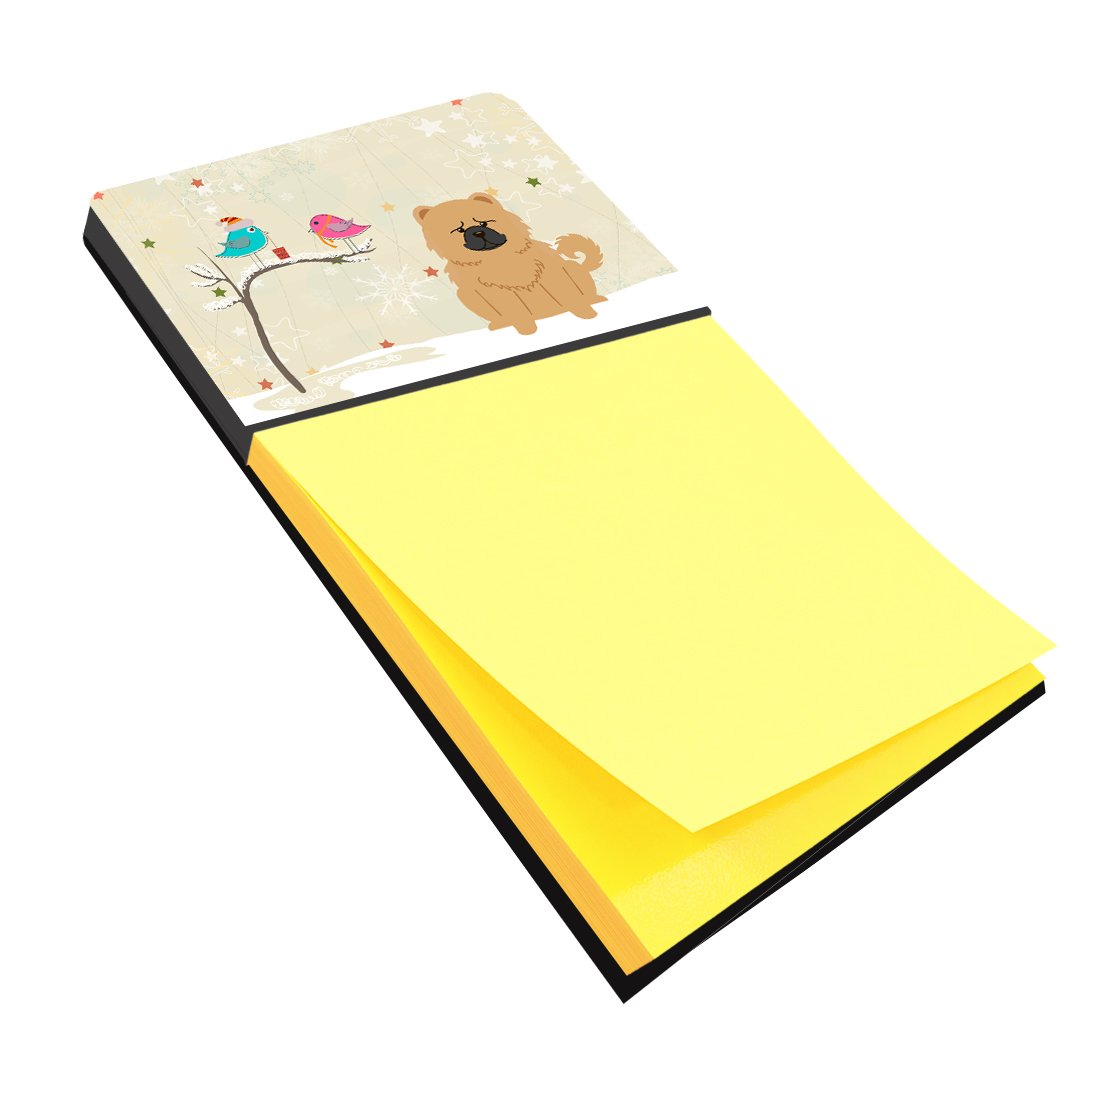 Christmas Presents between Friends Chow Chow Cream Sticky Note Holder BB2616SN by Caroline's Treasures